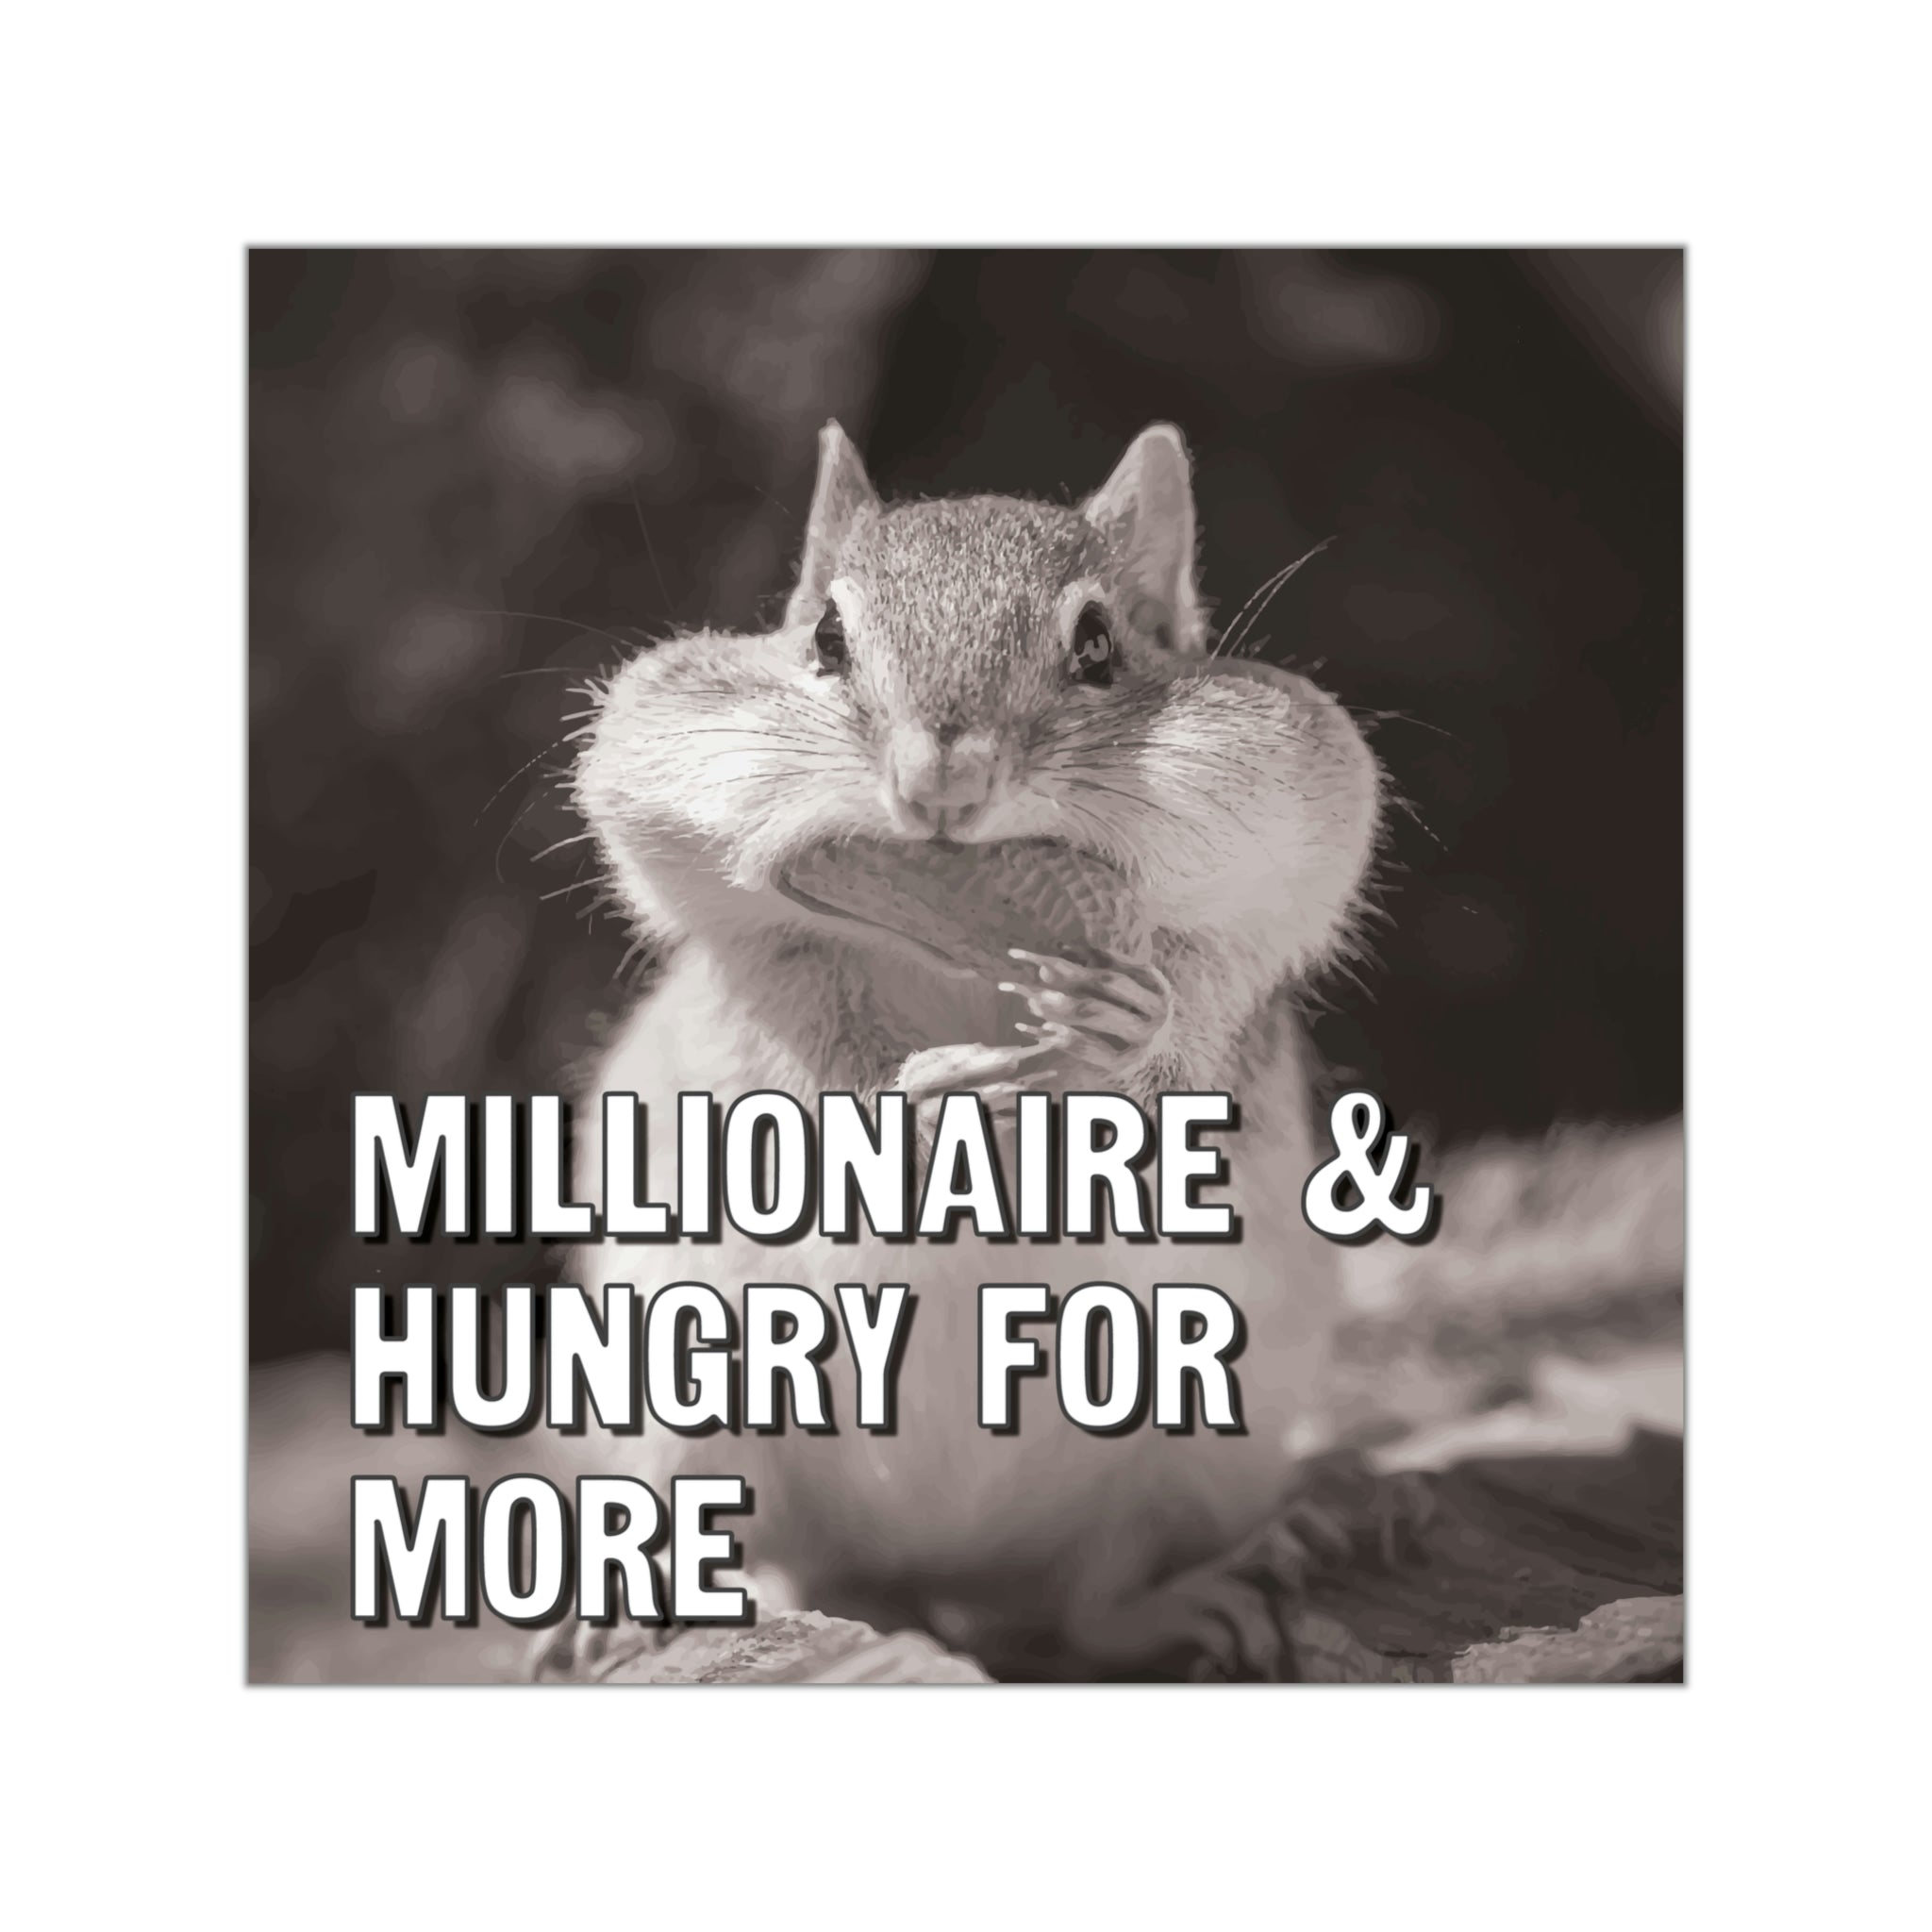 Millionaire and hungry for more sticker | Best millionaire quotes #size_5x5-inches